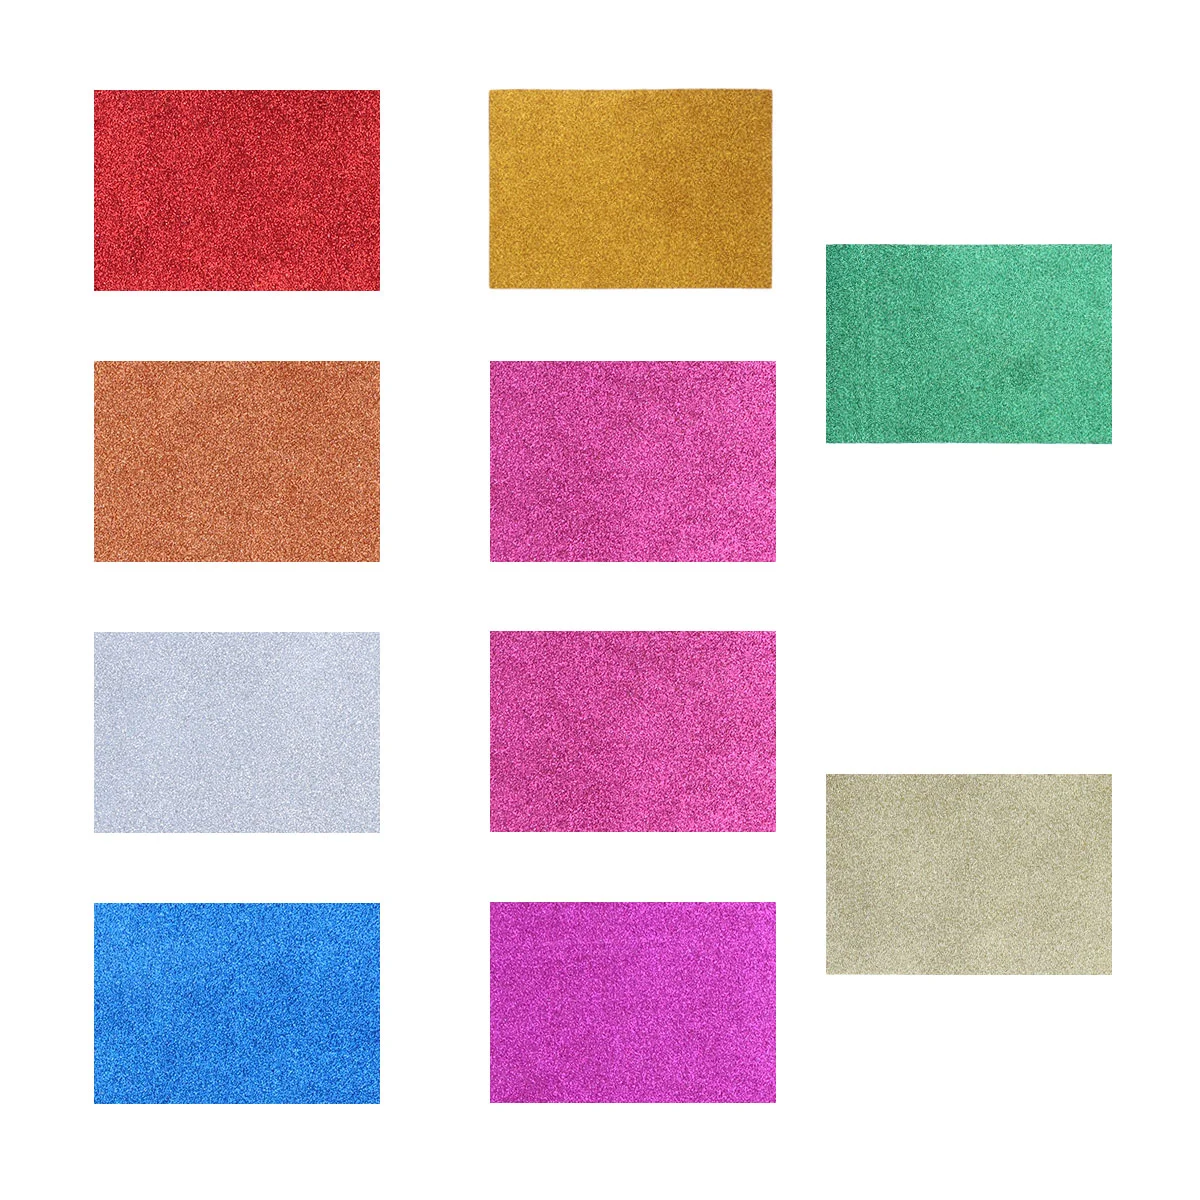 10 Sheets Colored Sparkly Paper Cardstock Paper Glitter Paper for DIY  Projects Gift Box Wrapping Birthday